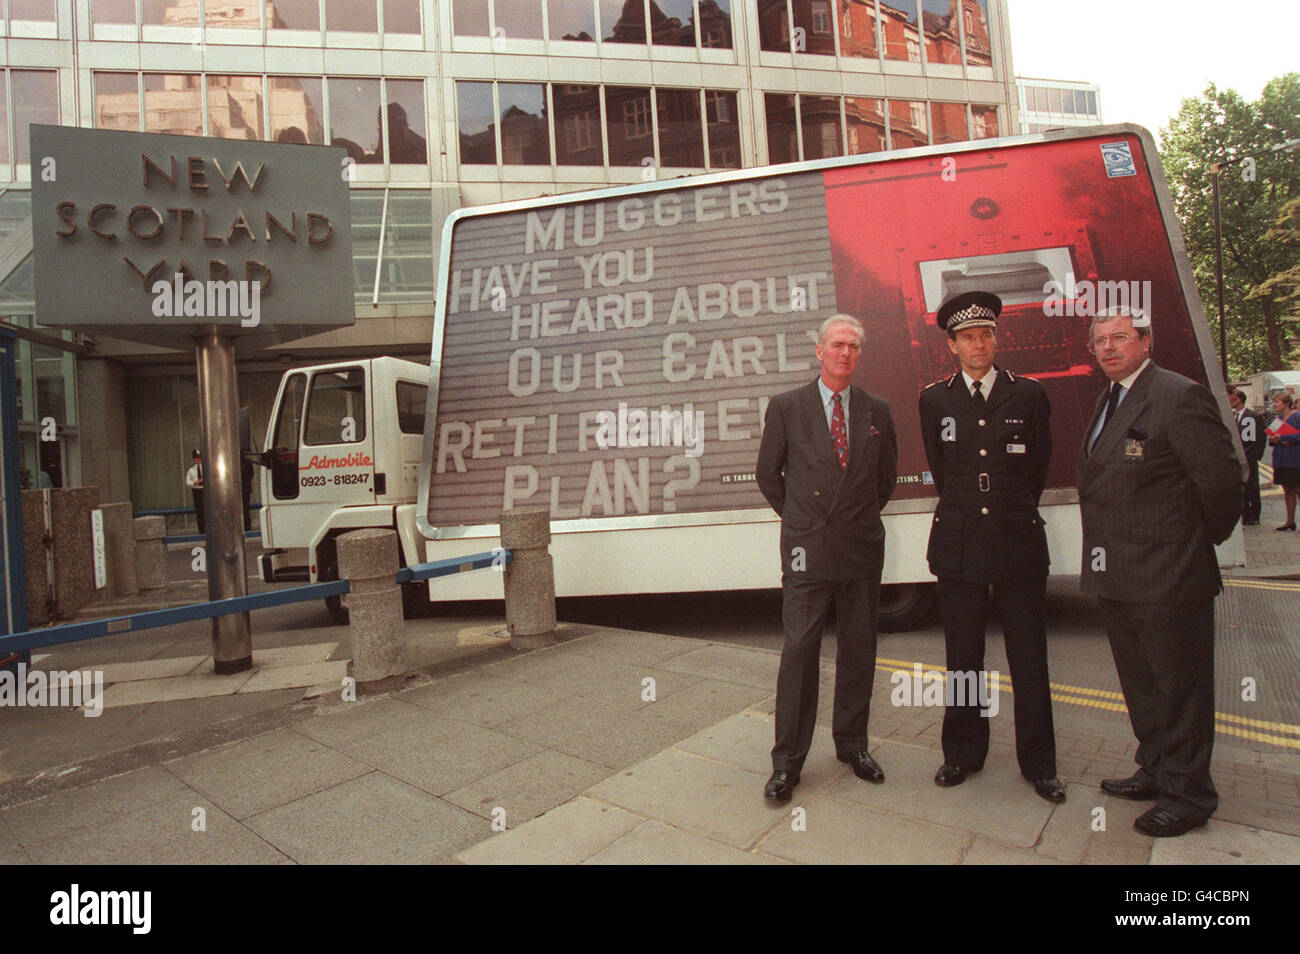 PA NEWS 14/9/95  COMMANDER BILL GRIFFITHS, ASSISTANT COMMISIONER IAN JOHNSTON AND QPM COMMANDER JOHN GRIEVE AT NEW SCOTLAND YARD TO ANNOUNCE HI TECH EQUIPMENT TO ENHANCE SURVEILLANCE AND INTELLIGENCE WORK TO BE ISSUED TO LOCAL POLICE Stock Photo